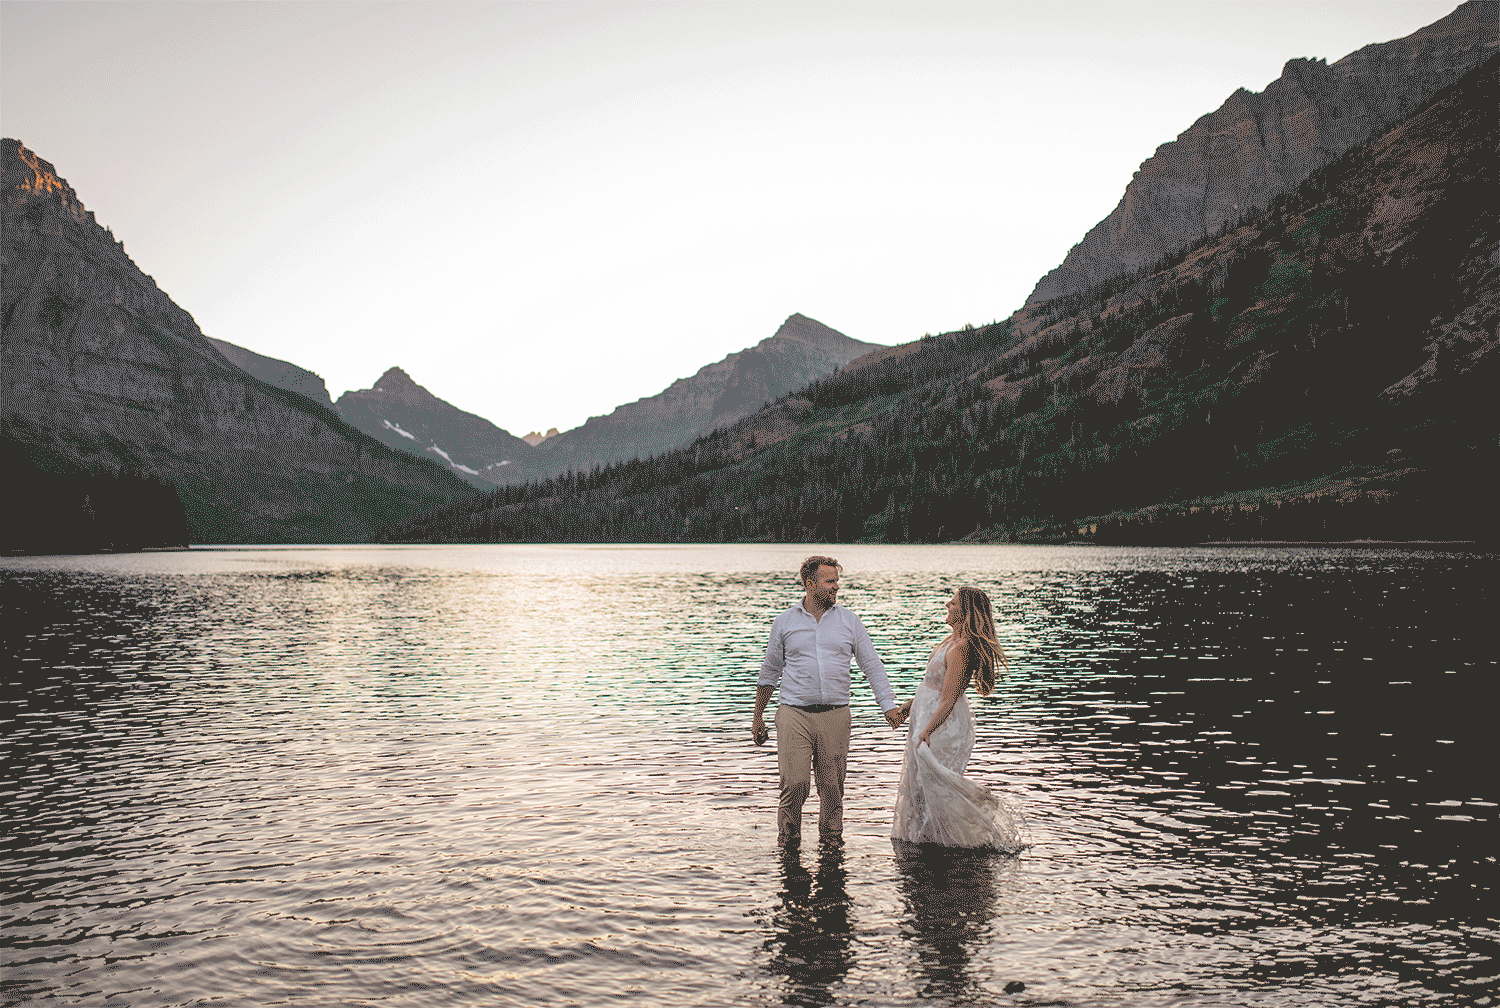 GIF of bride and groom playing together in lake among mountains.